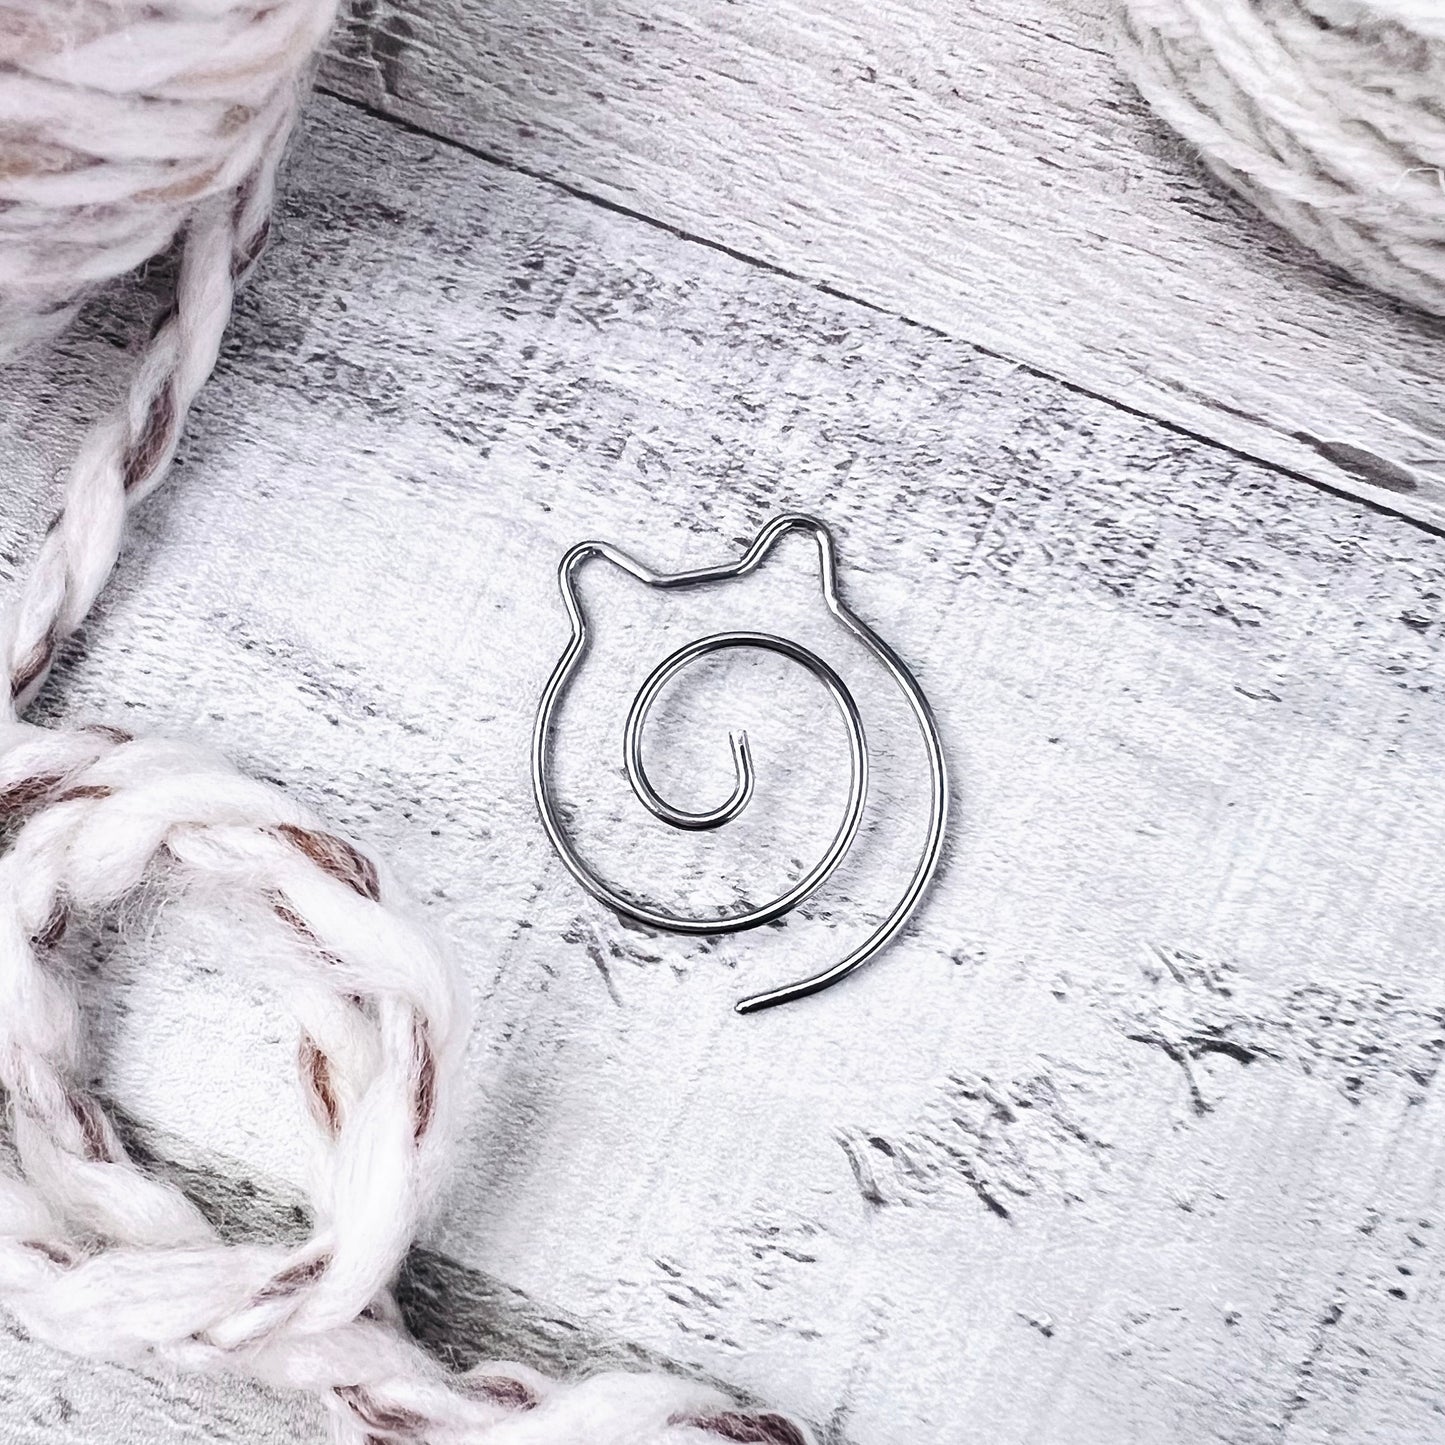 Cat Spiral Knitting Cable Needle